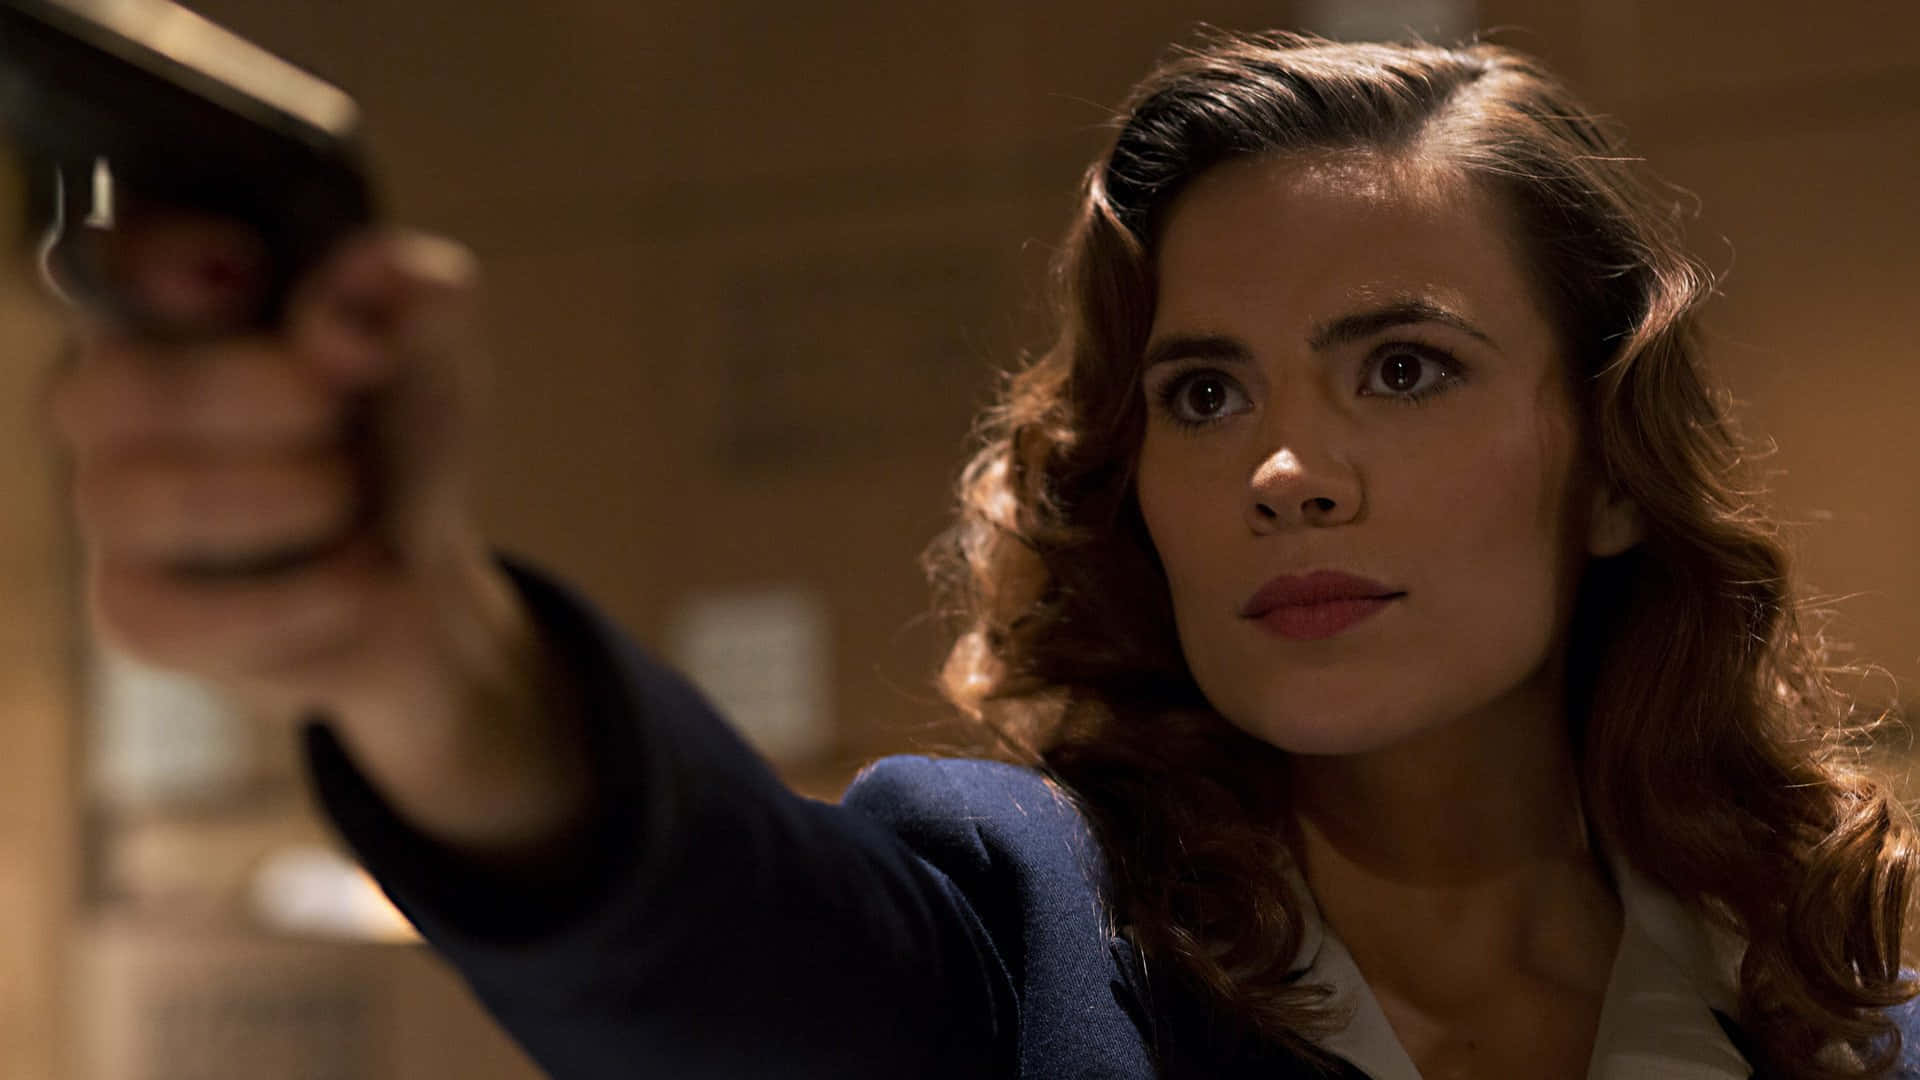 Agent Peggy Carter fights for justice Wallpaper